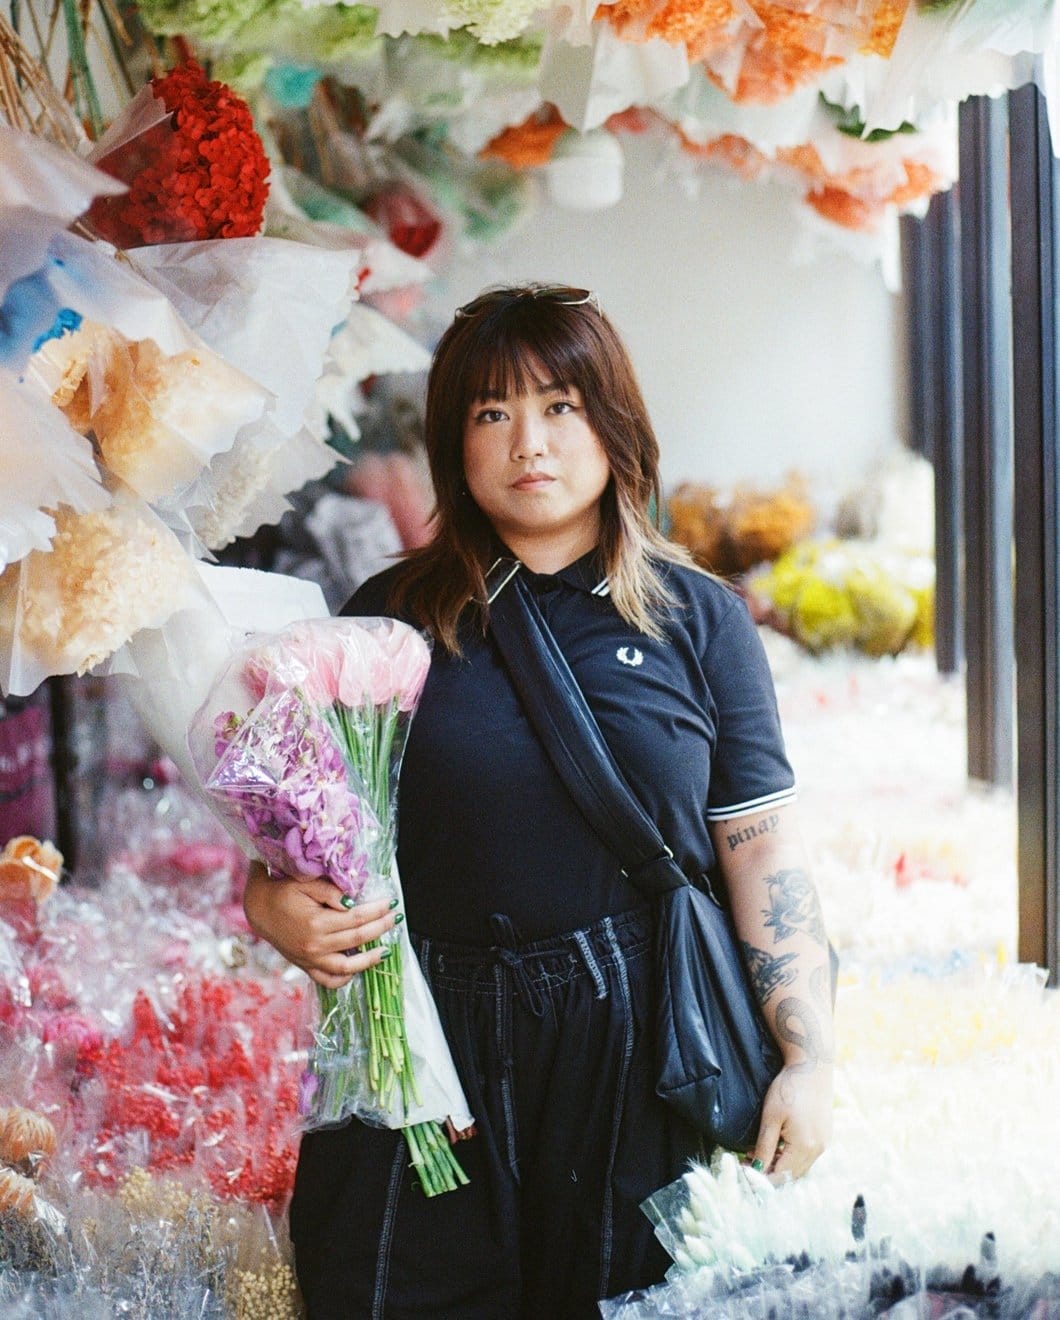 Asian female model wearing a black Fred Perry shirt in a flowers market.